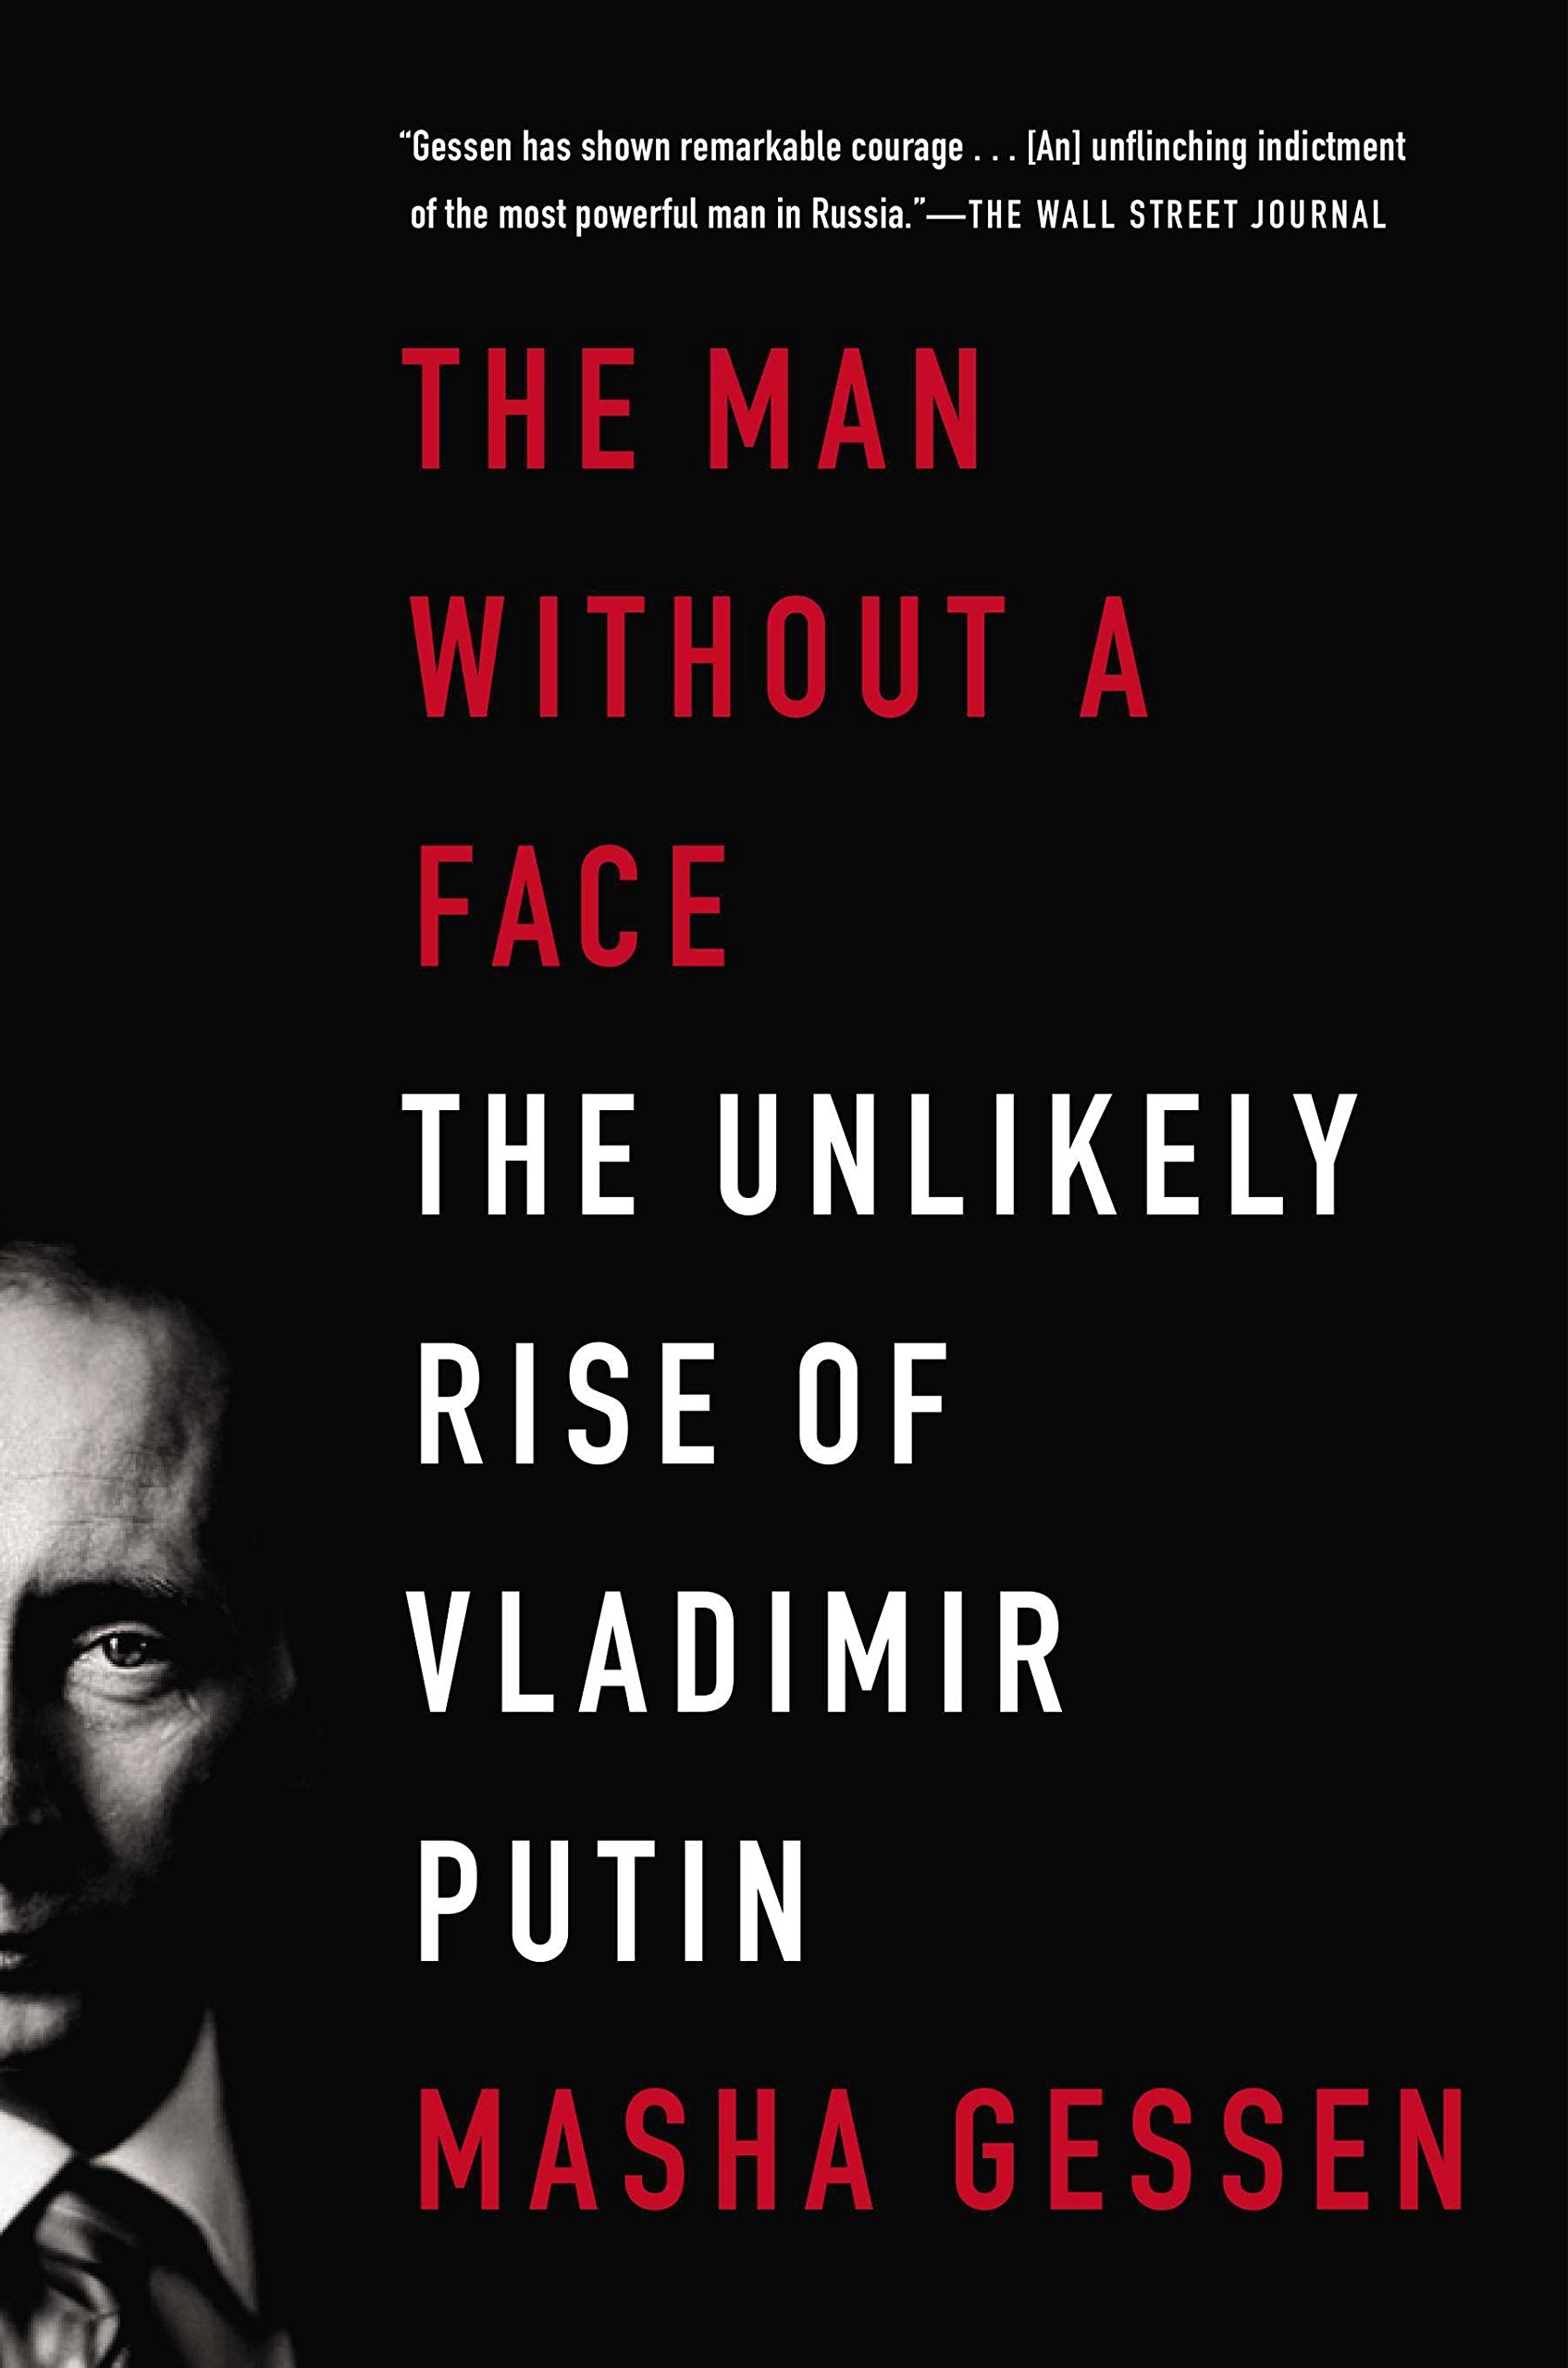 The Man Without a Face: The Unlikely Rise of Vladimir Putin - listen book free online